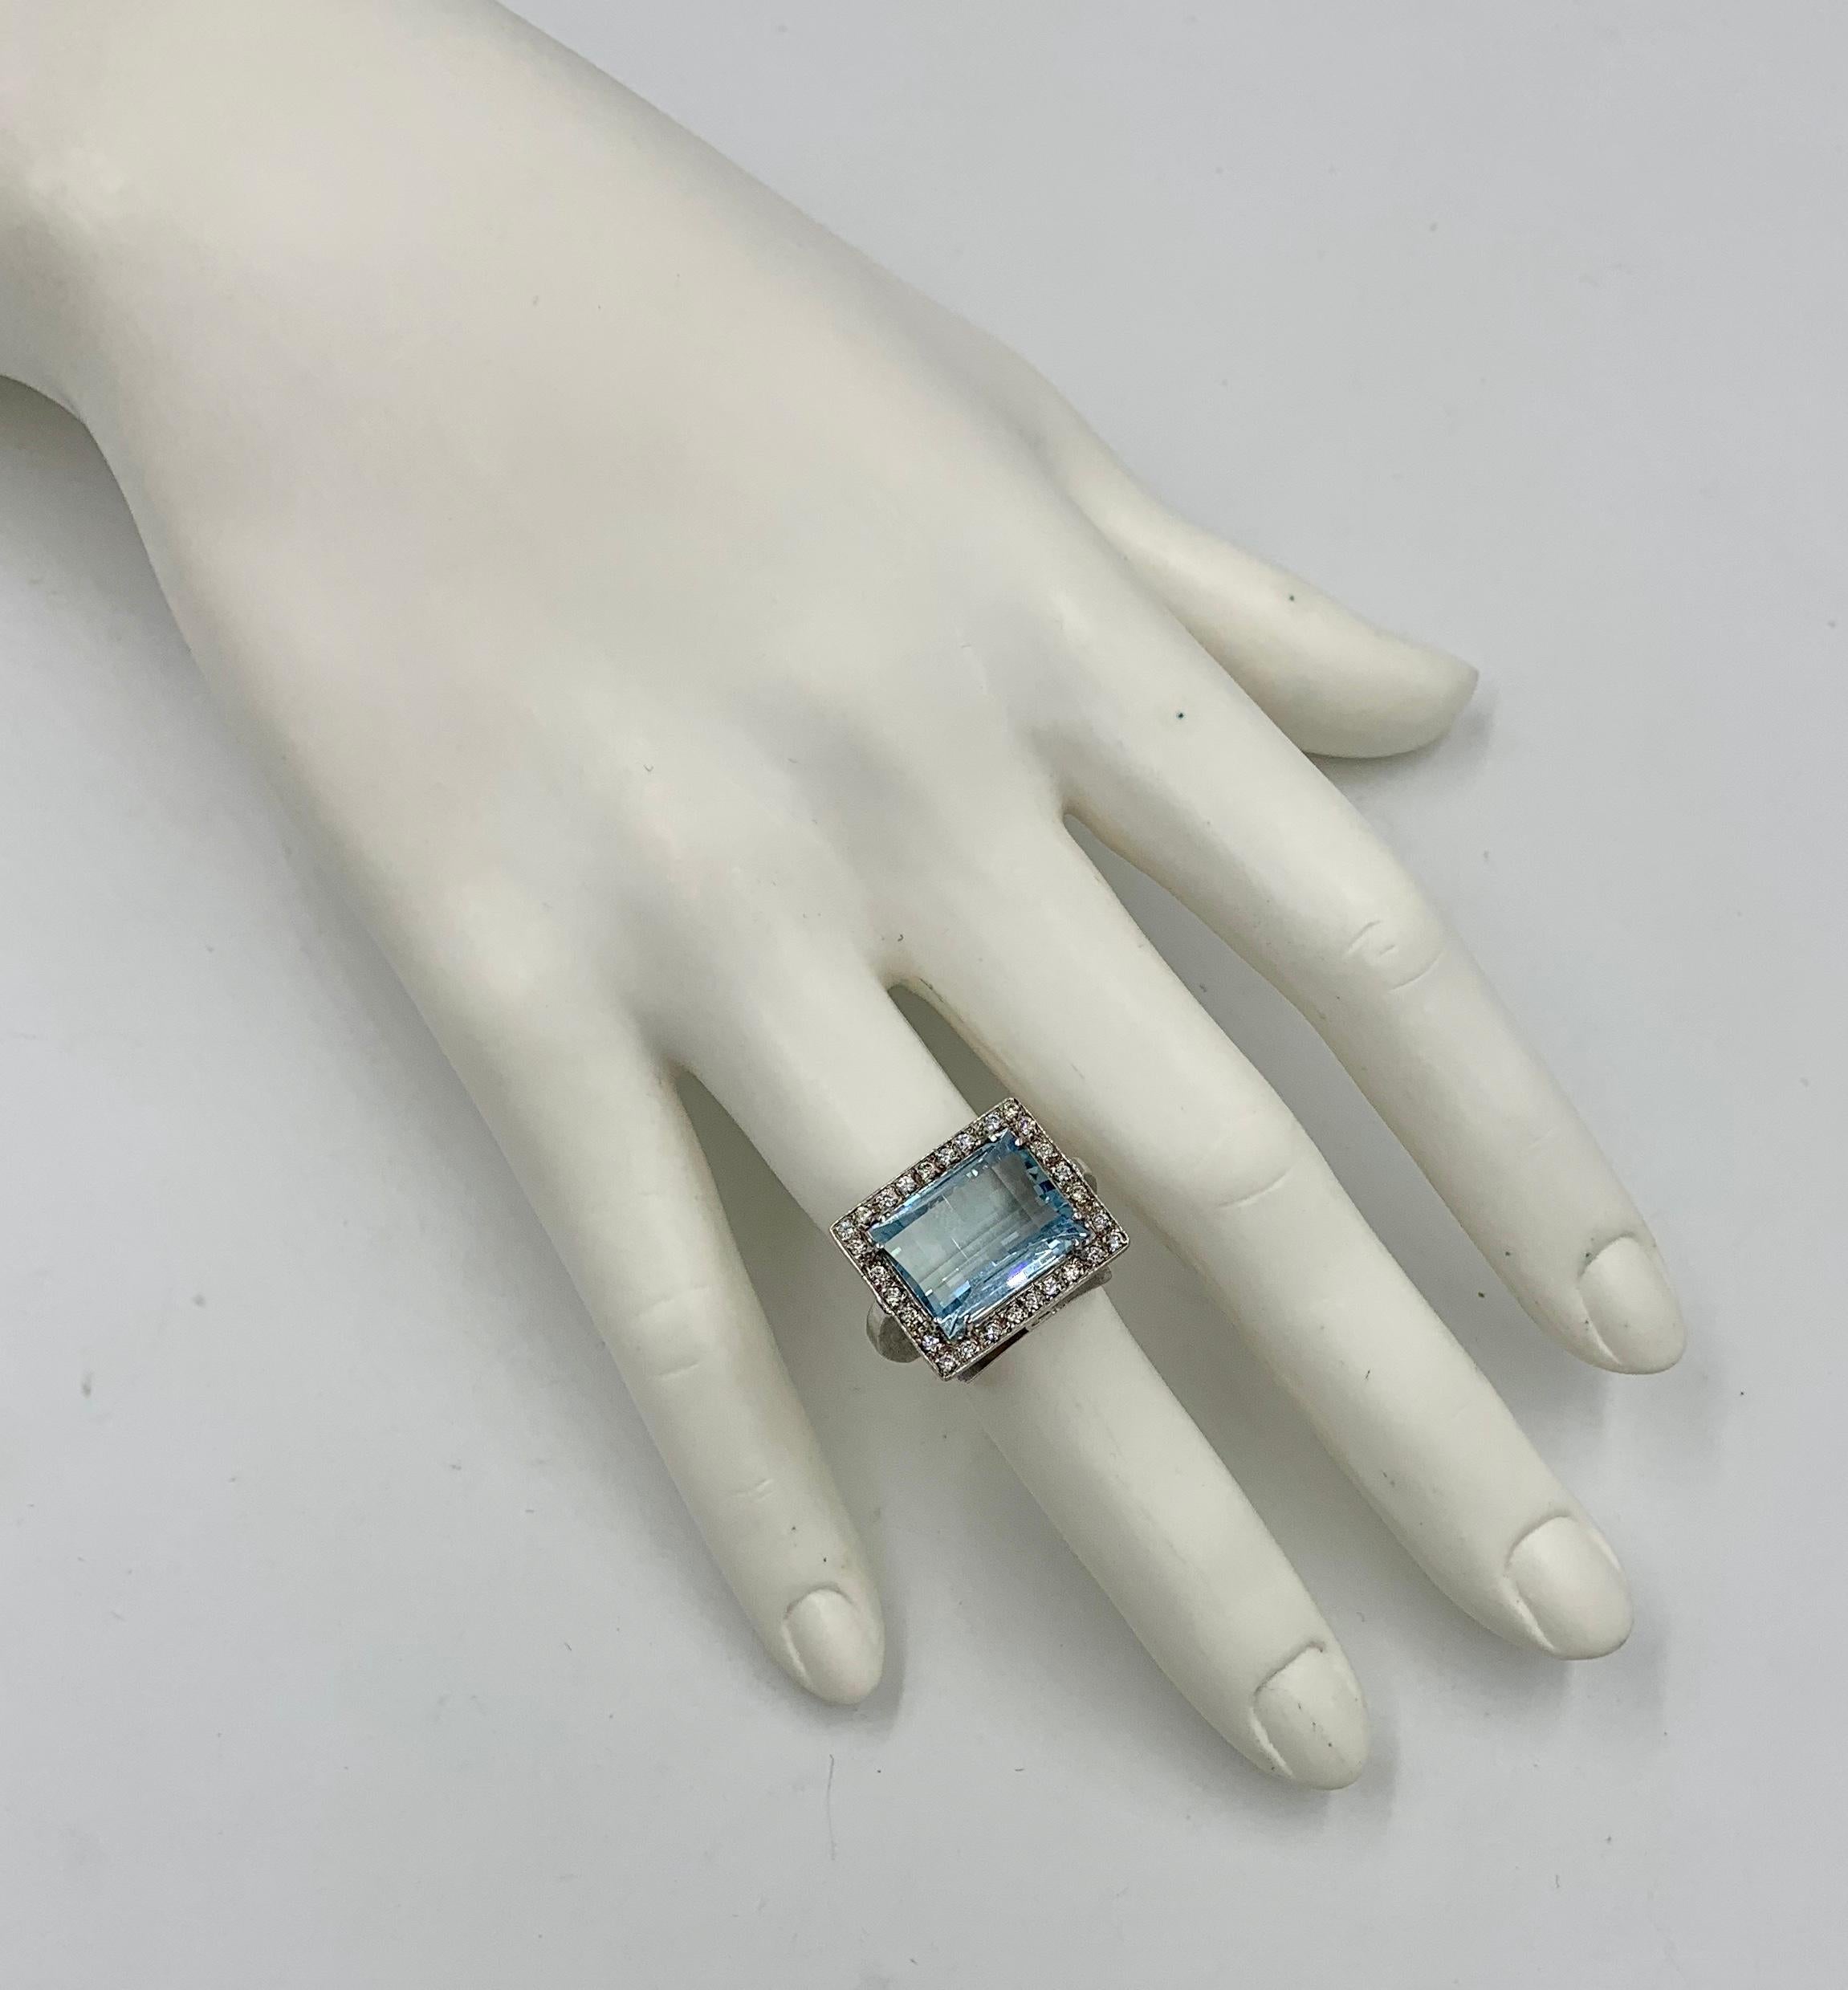 9 Carat Aquamarine 30 Diamond Ring 18 Karat Gold Fancy Beveled Checkerboard Cut In Good Condition For Sale In New York, NY